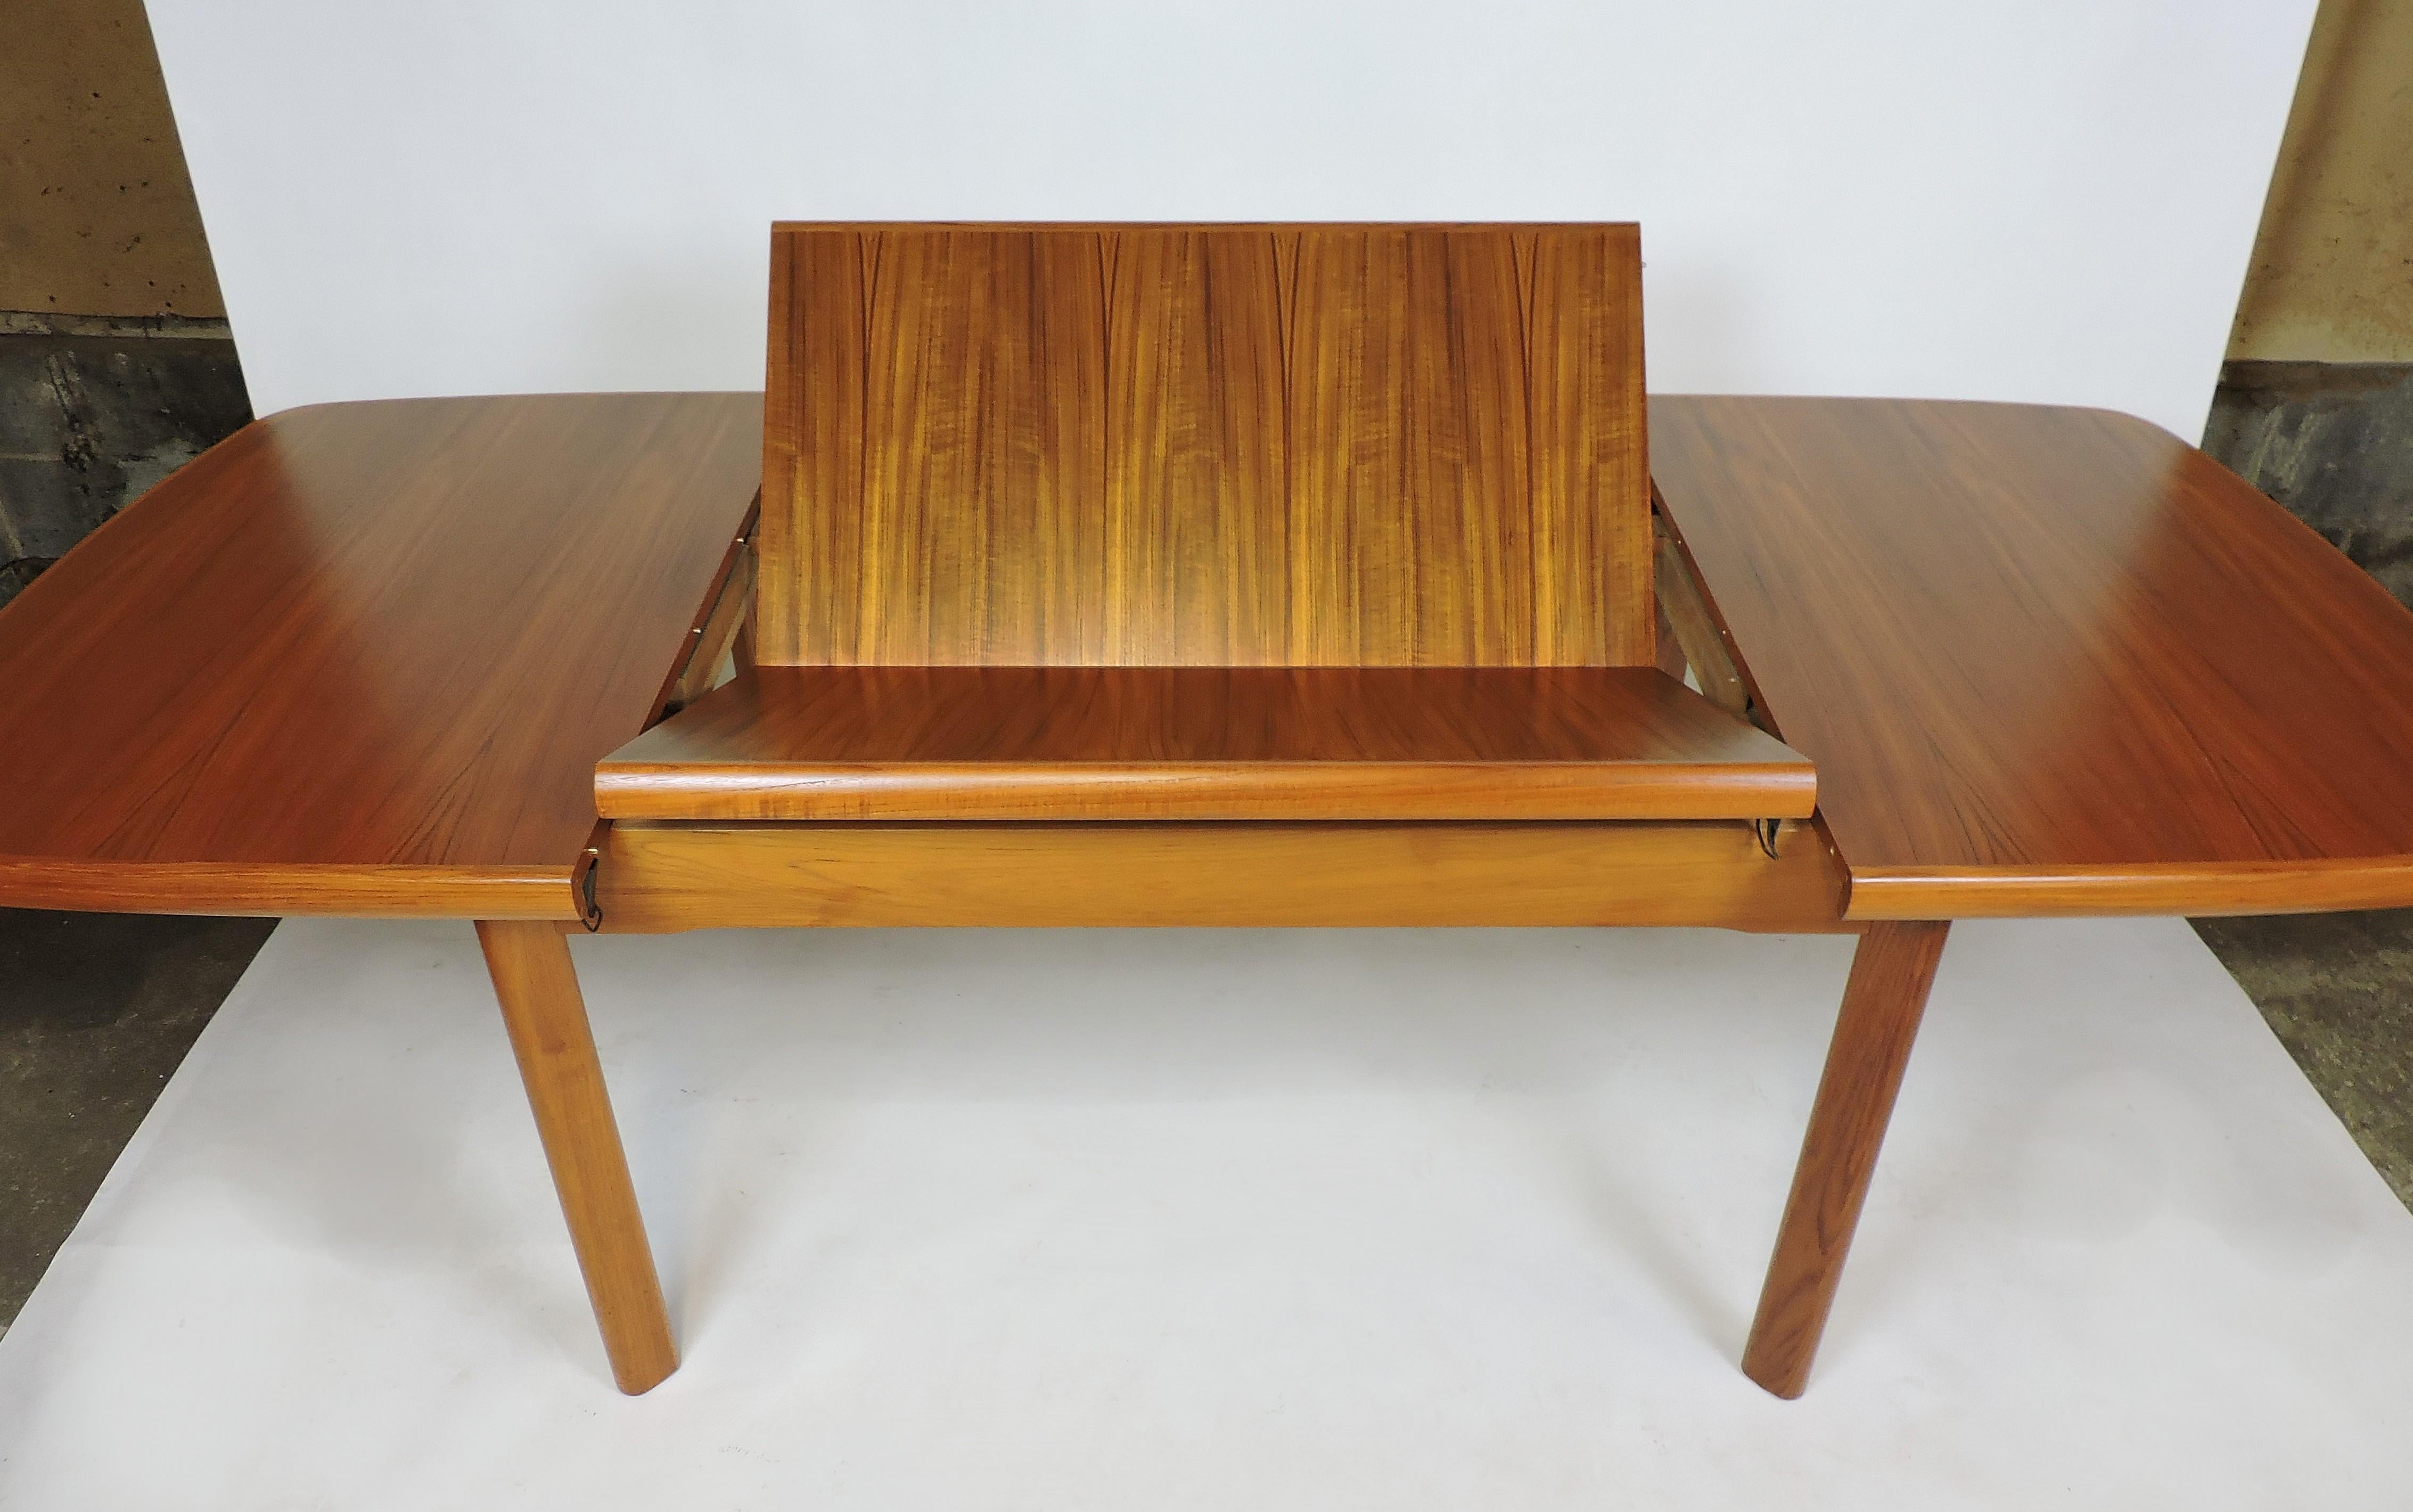 Beautiful and high quality Danish design teak dining table. This table has a self-storing butterfly leaf and can extend from 55 inches when closed to 92 1/2 inches long when opened. The top has a beautiful grain pattern, thick edge banding with